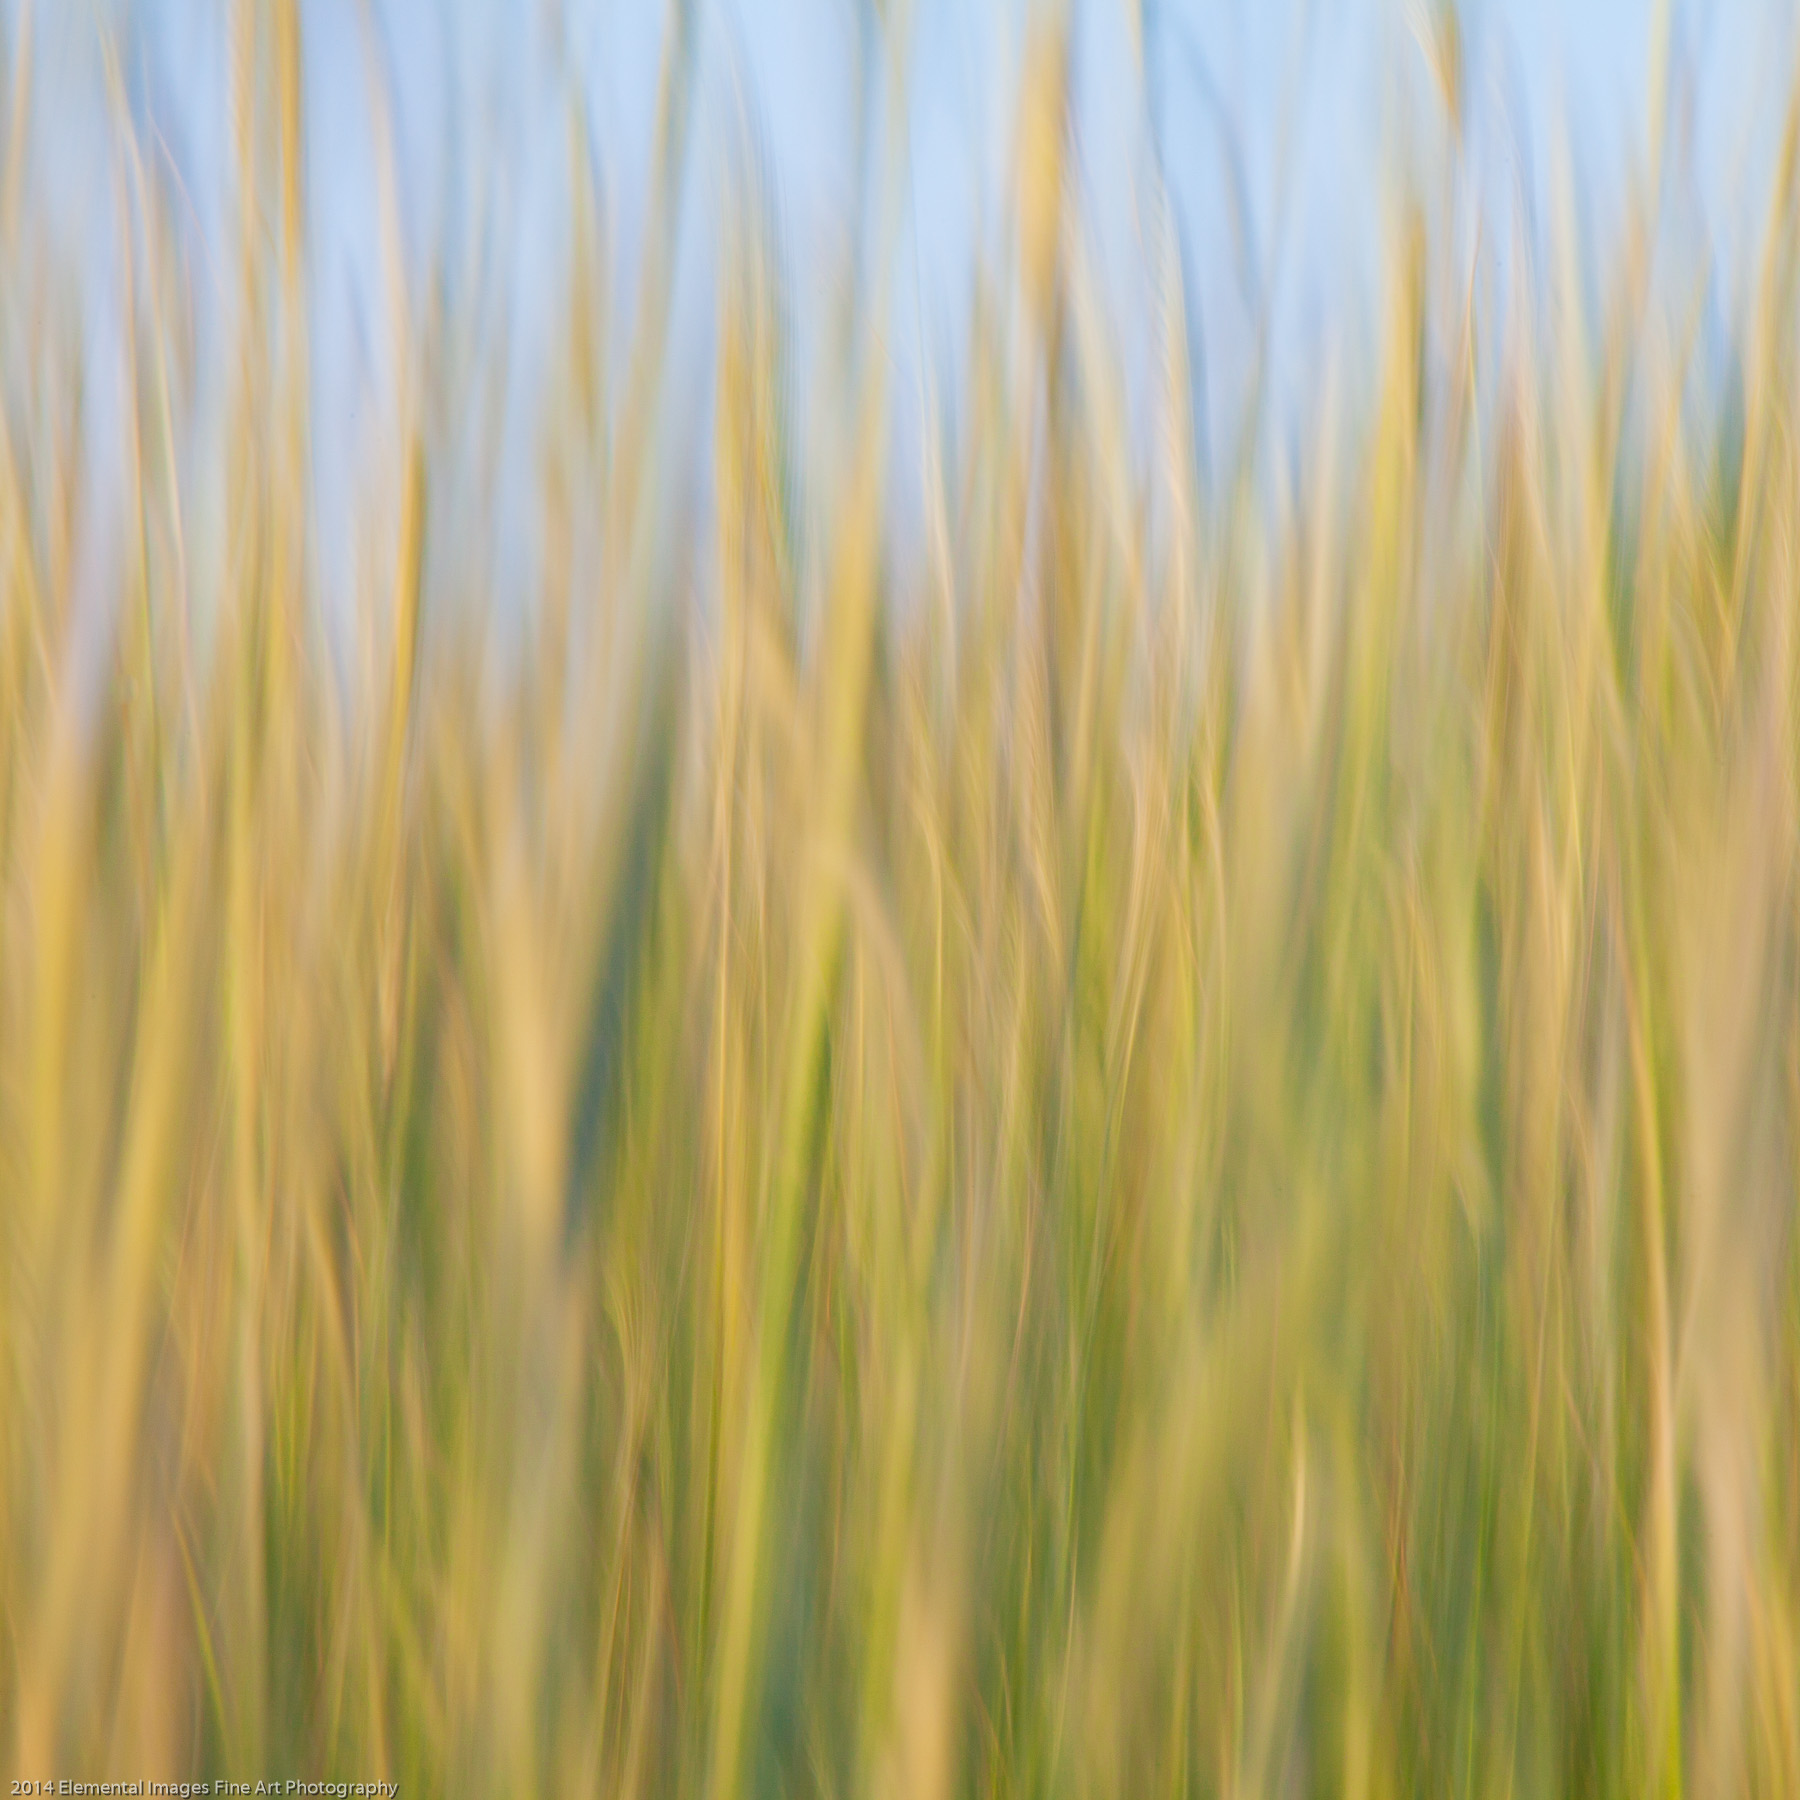 Grasses CI | The Palouse | WA | USA - © 2014 Elemental Images Fine Art Photography - All Rights Reserved Worldwide